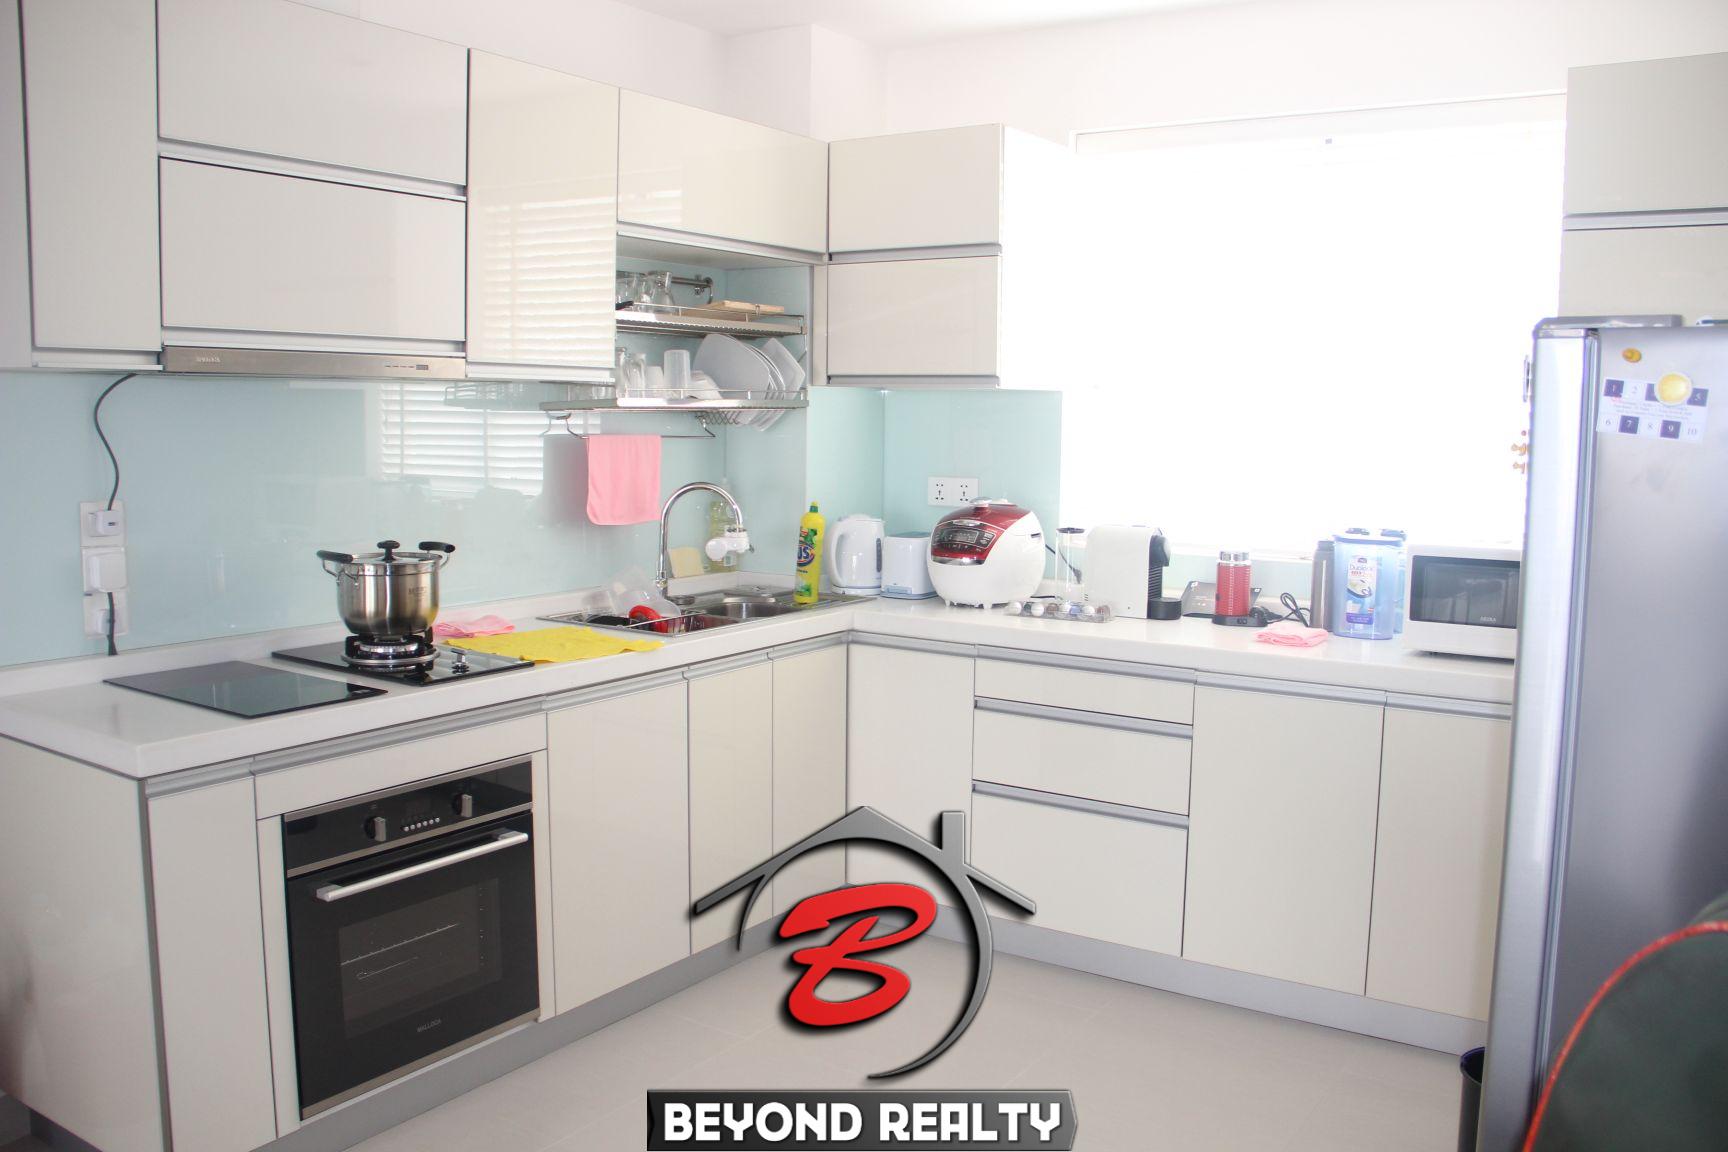 the kitchen of the 2-bedroom luxury serviced apartment for rent in BKK1 in Phnom Penh Cambodia